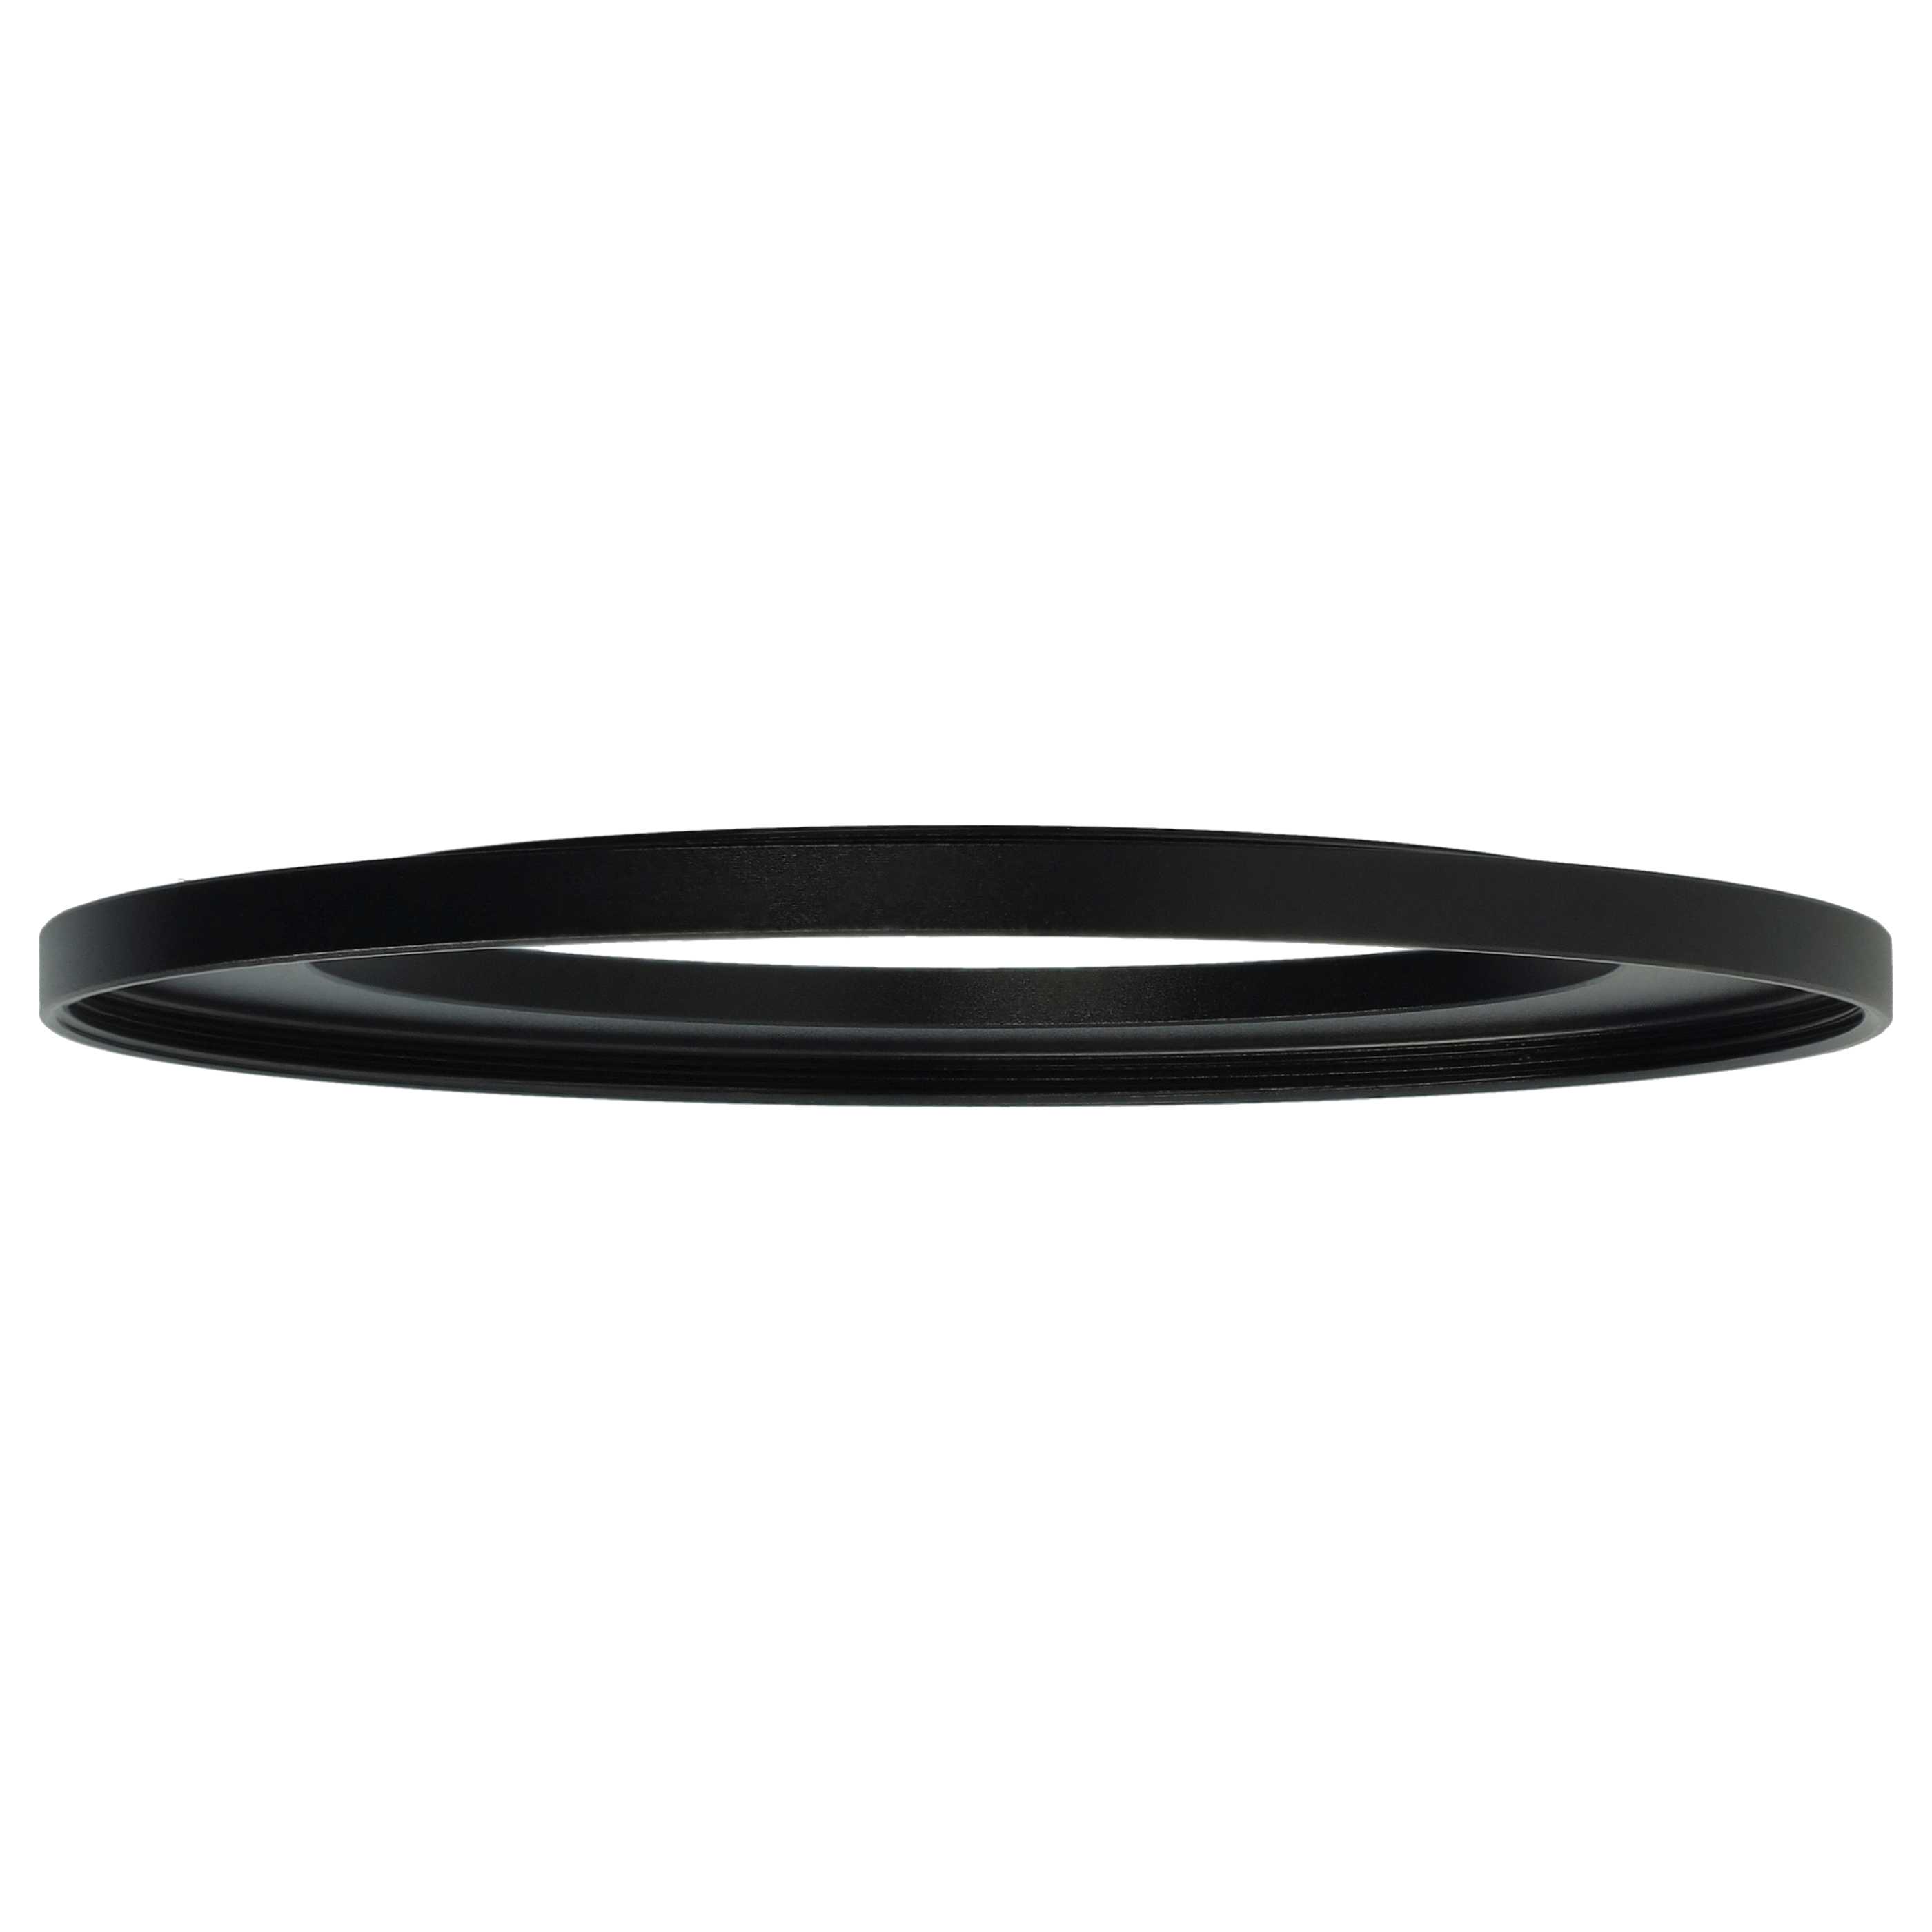 Step-Up Ring Adapter of 72 mm to 95 mmfor various Camera Lens - Filter Adapter